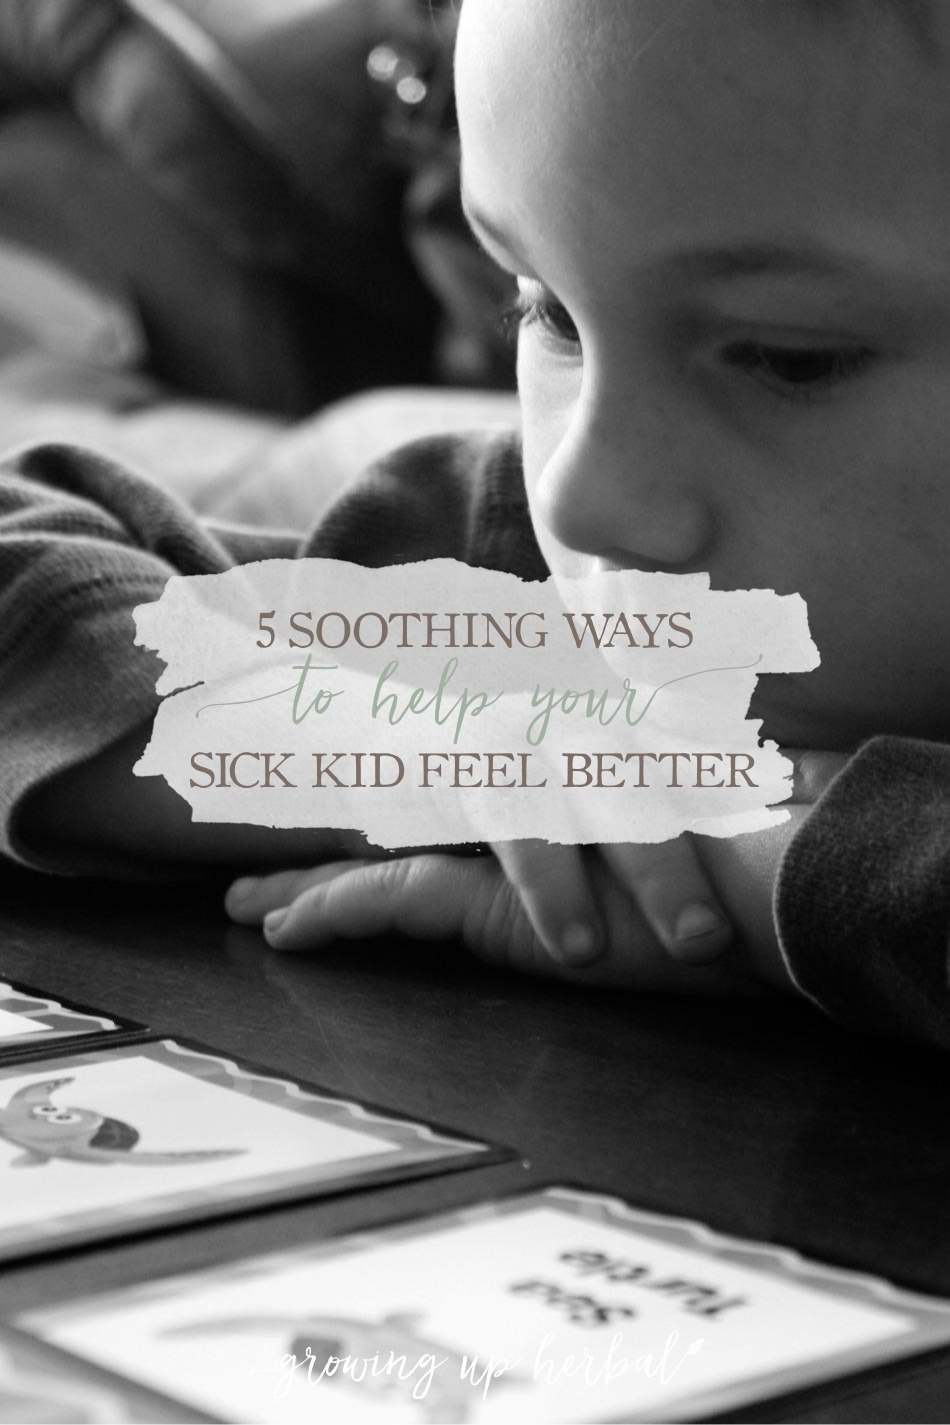 5 Soothing Ways To Help Your Sick Kid Feel Better | Growing Up Herbal | Being sick is tough on kids and parents. Here are some natural remedies and soothing methods to help your kids feel better faster.